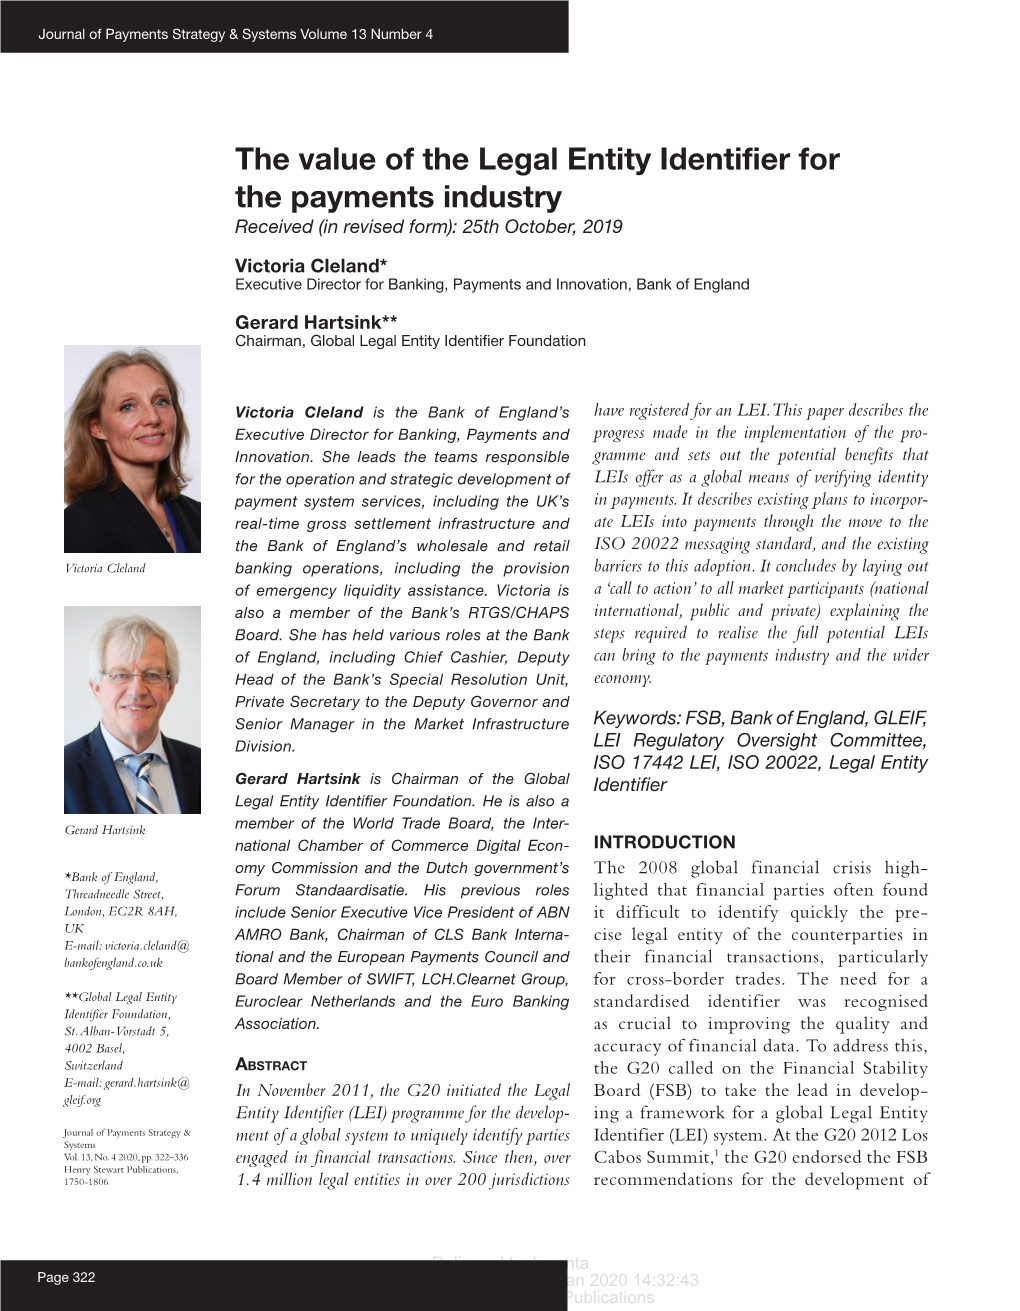 The Value of the Legal Entity Identifier for the Payments